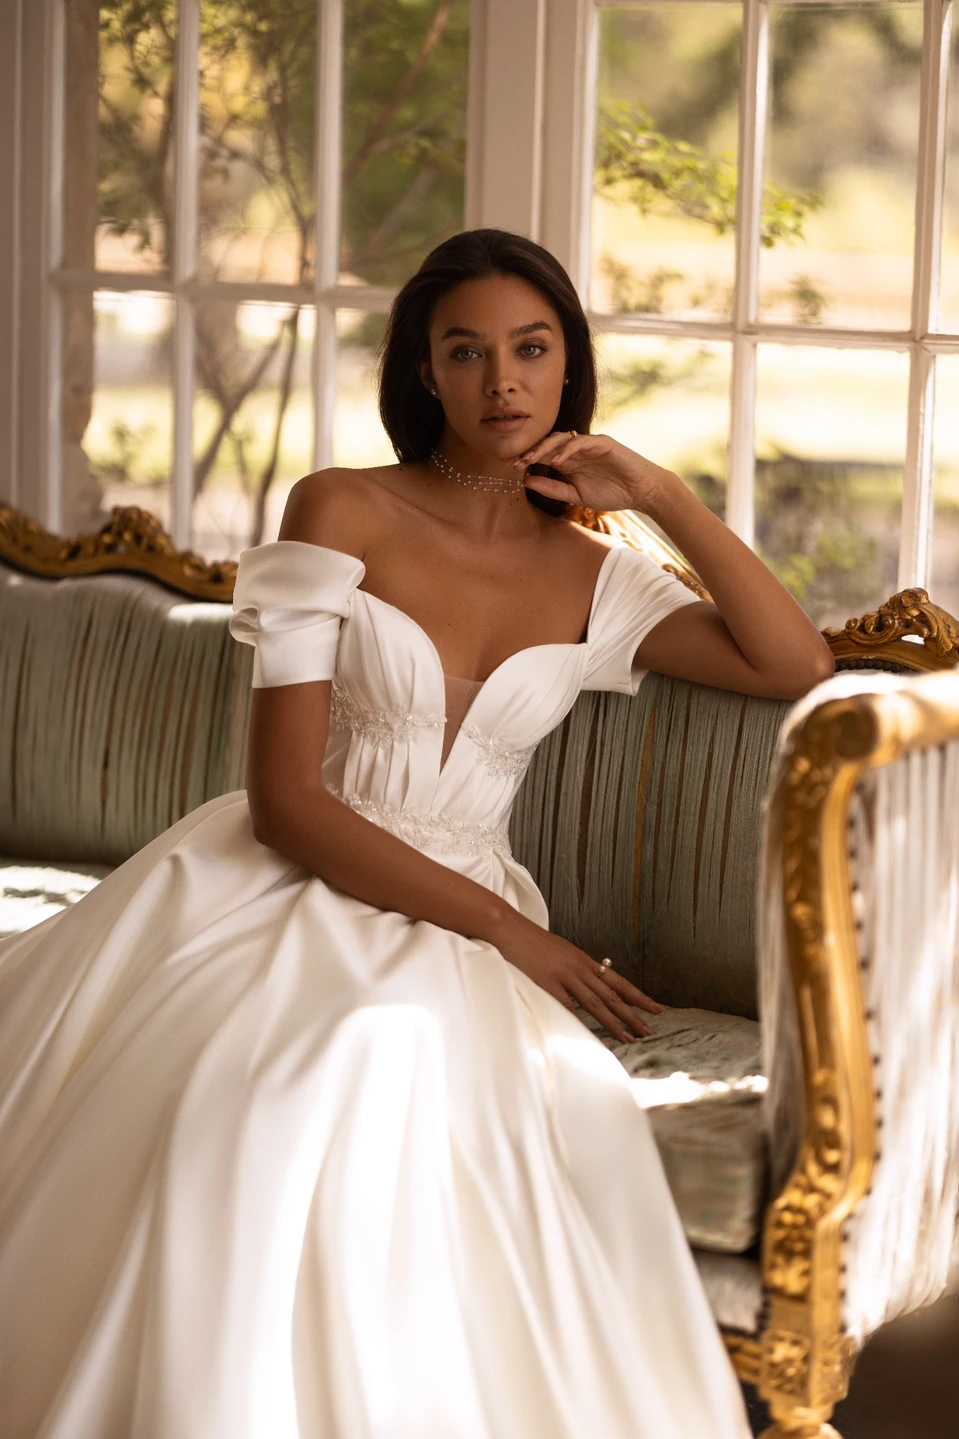 a girl sitting on a sofa and wearing a wedding dress